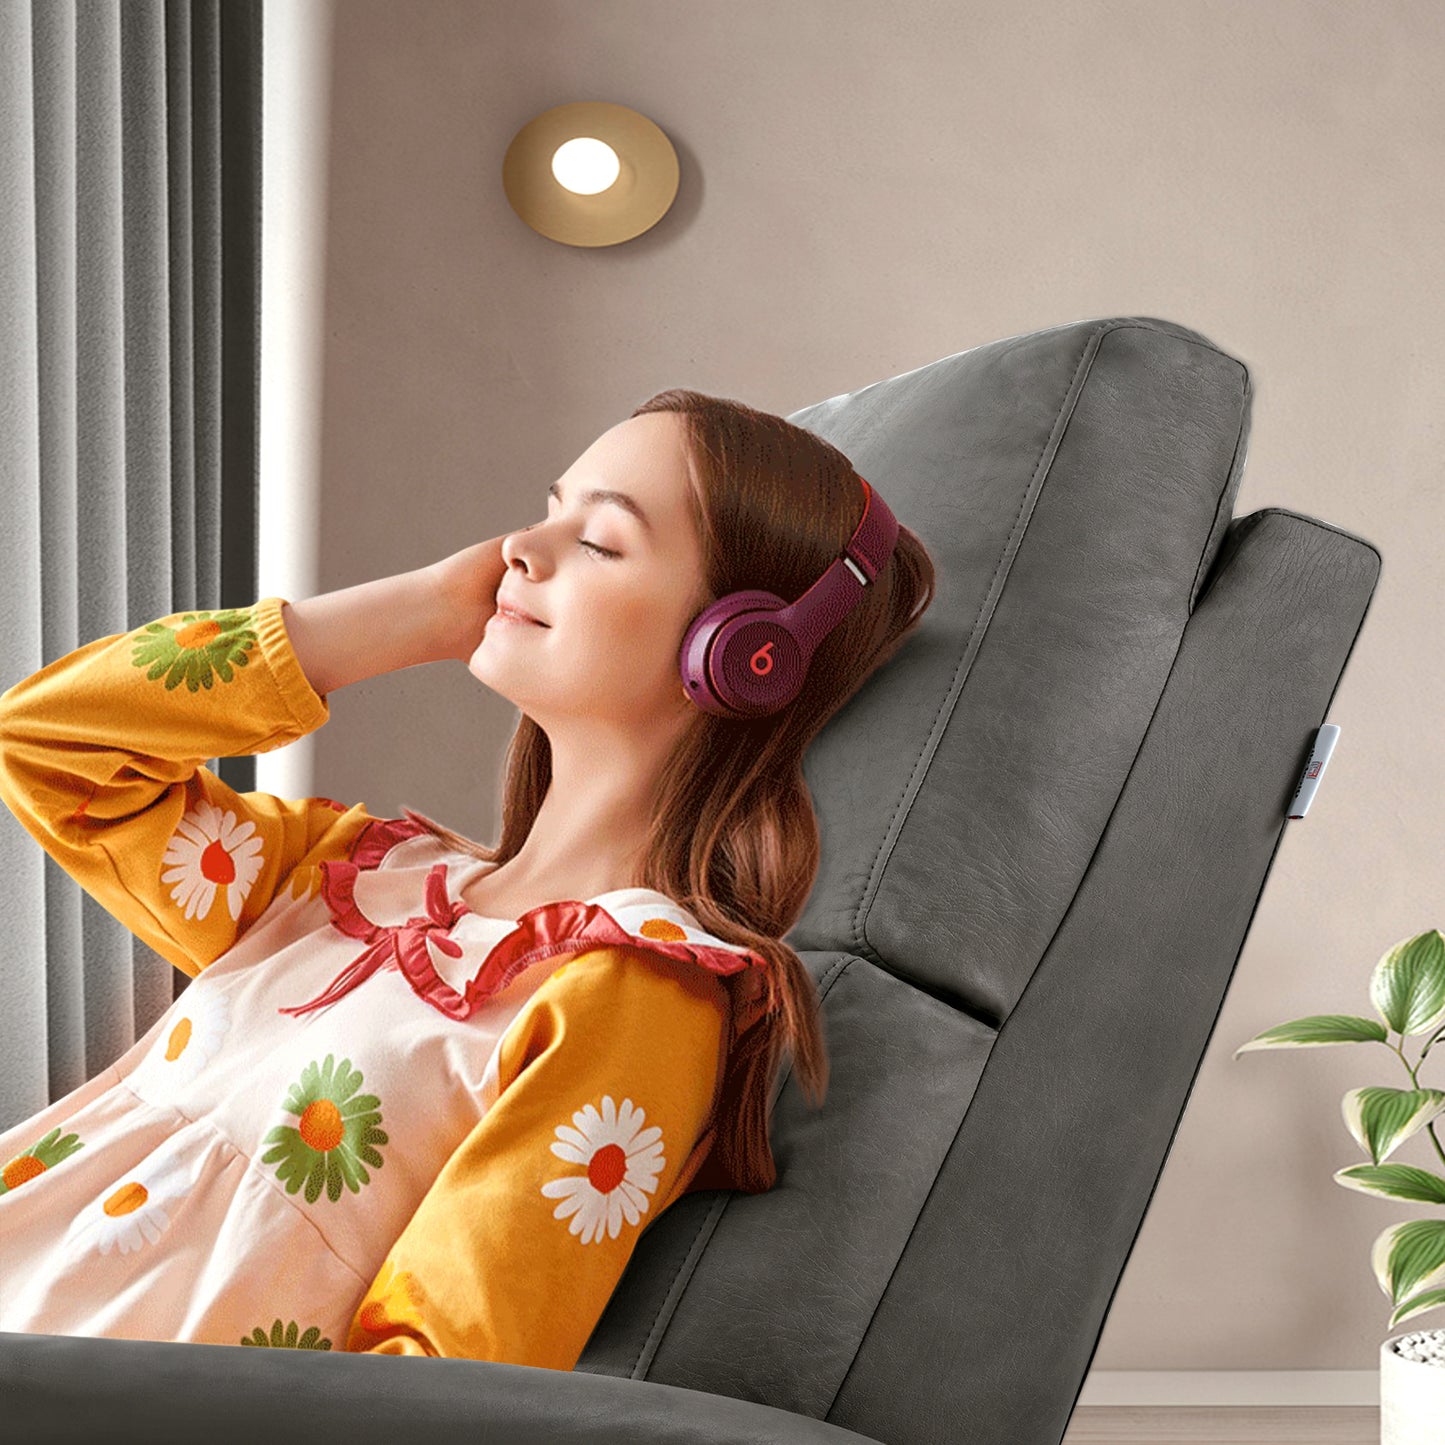 CompactLux Streamline: Space-Saver Power Recliner with USB